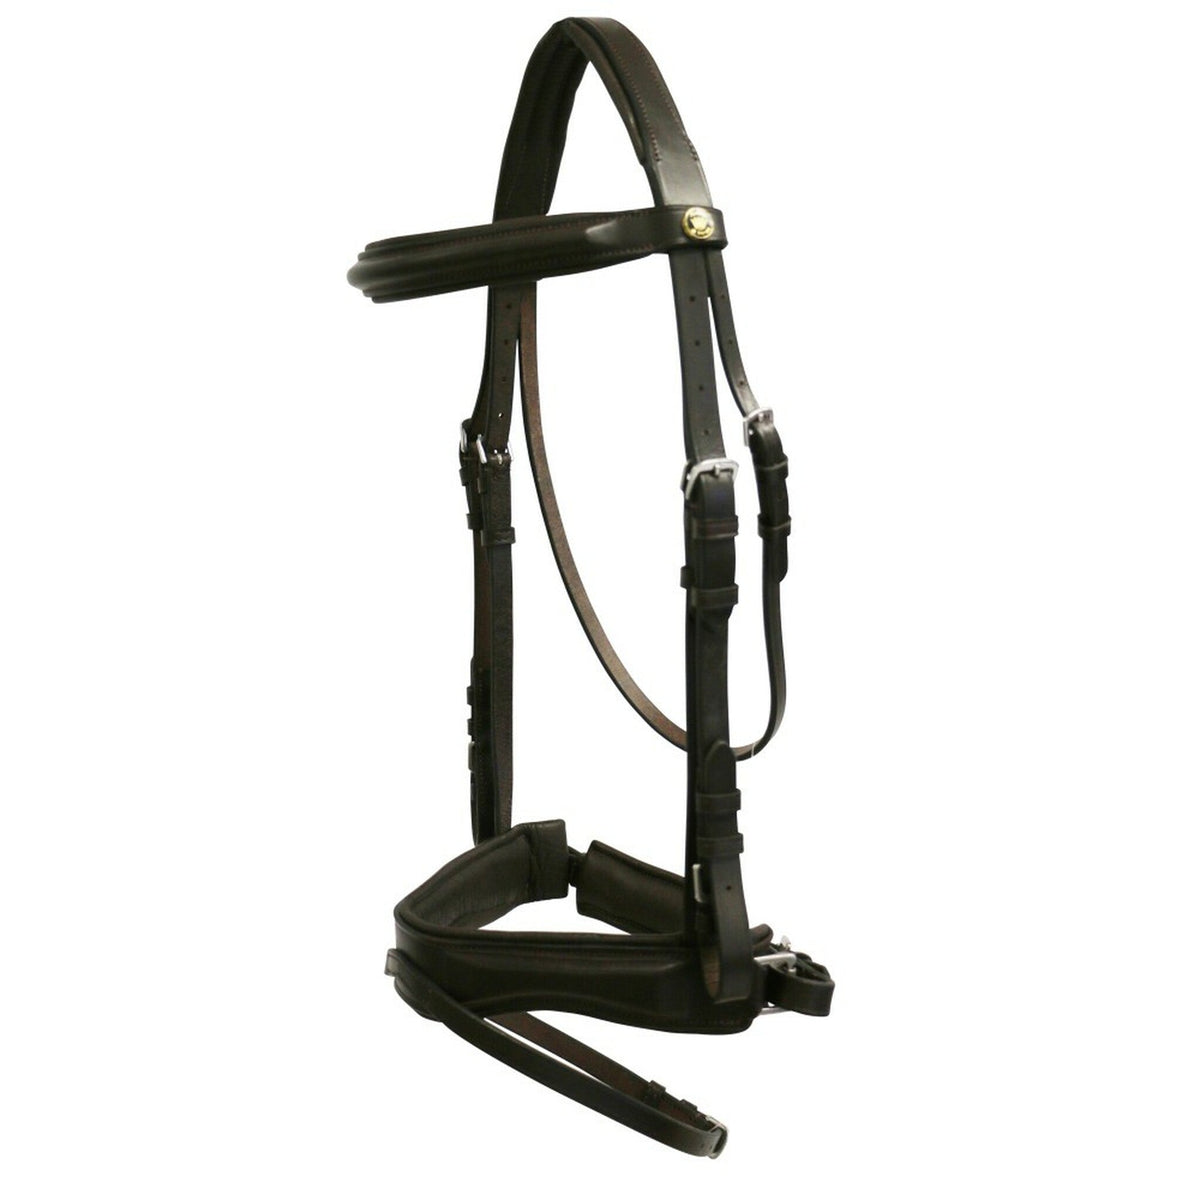 JEREMY AND LORD BRIDLES & STRAPPING Jeremy And Lord Premier Padded Snaffle Bridle